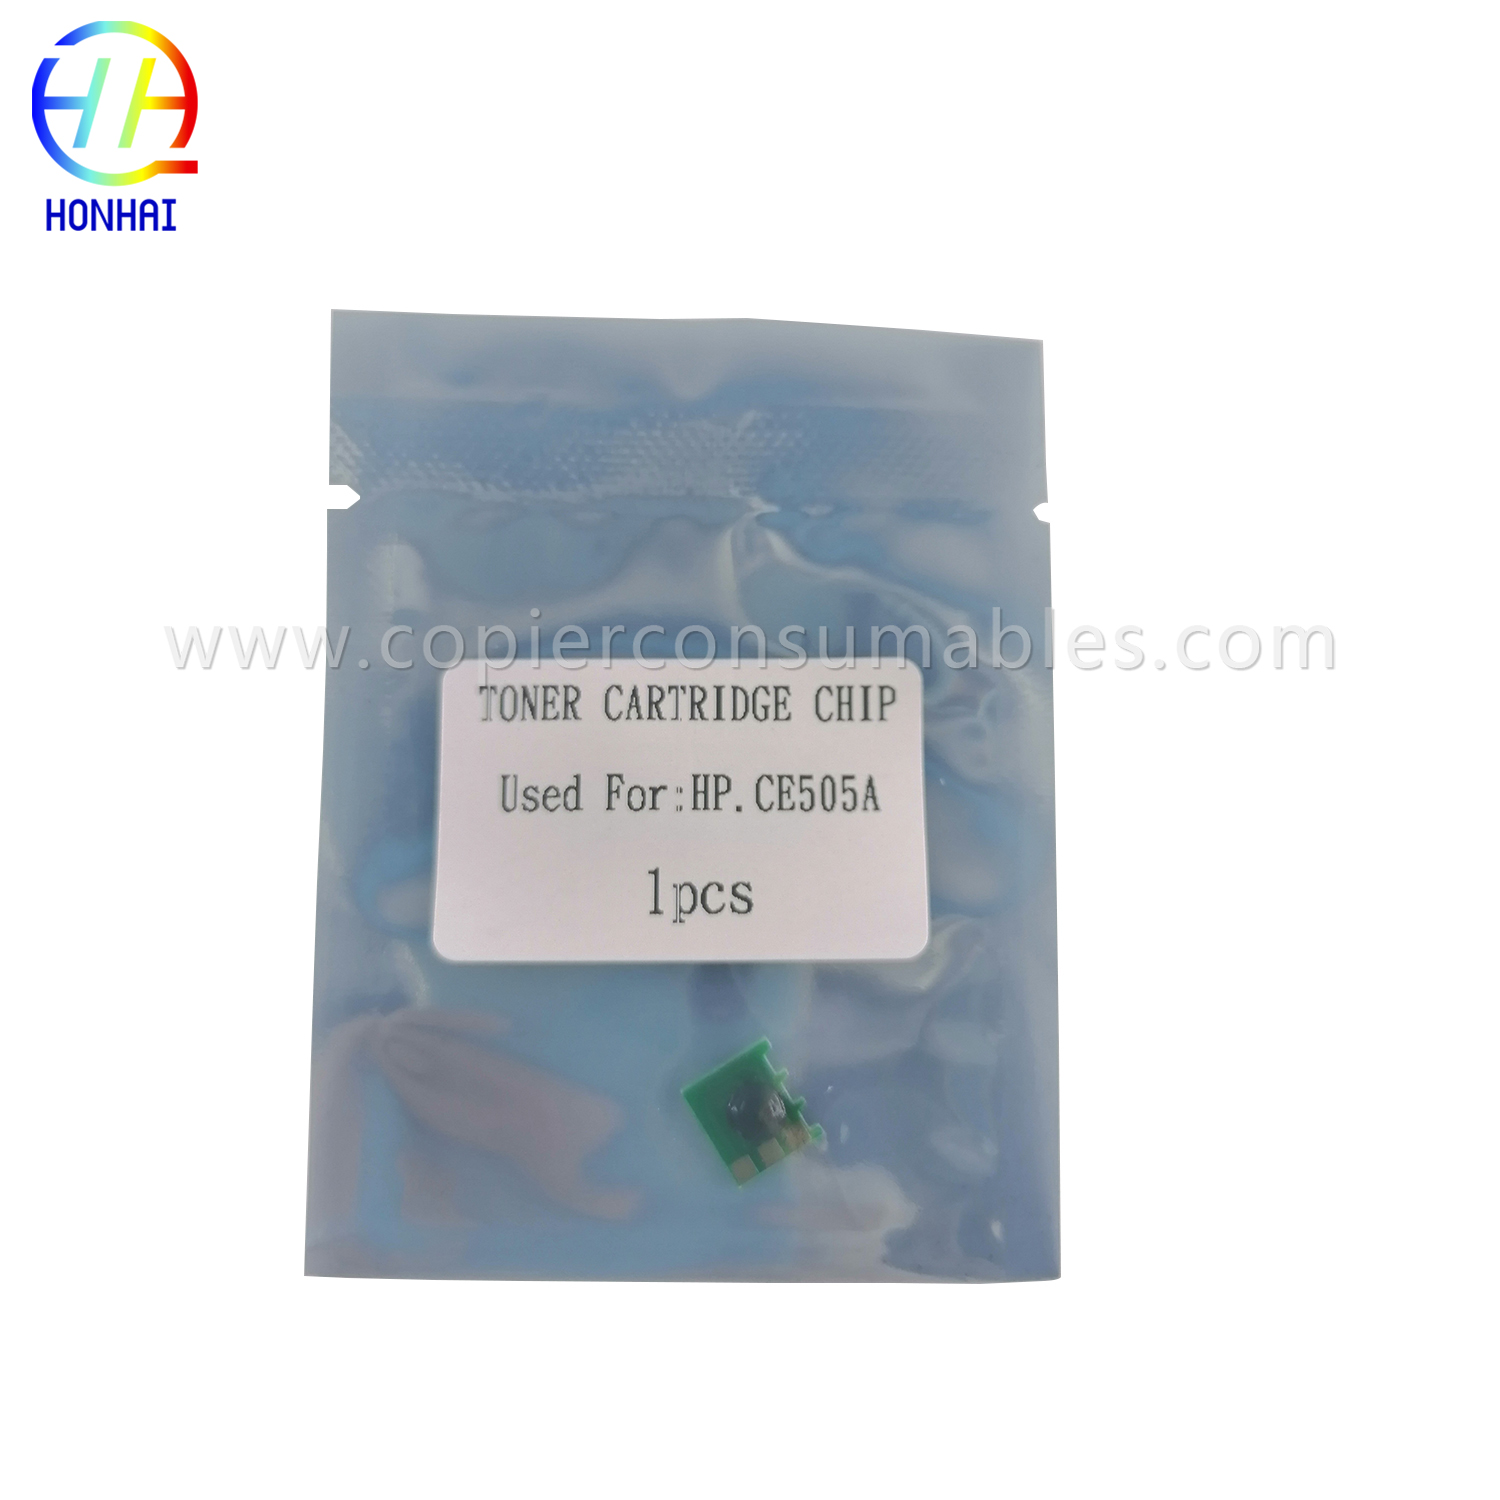 Toner Chip for HP 2035 CE505A